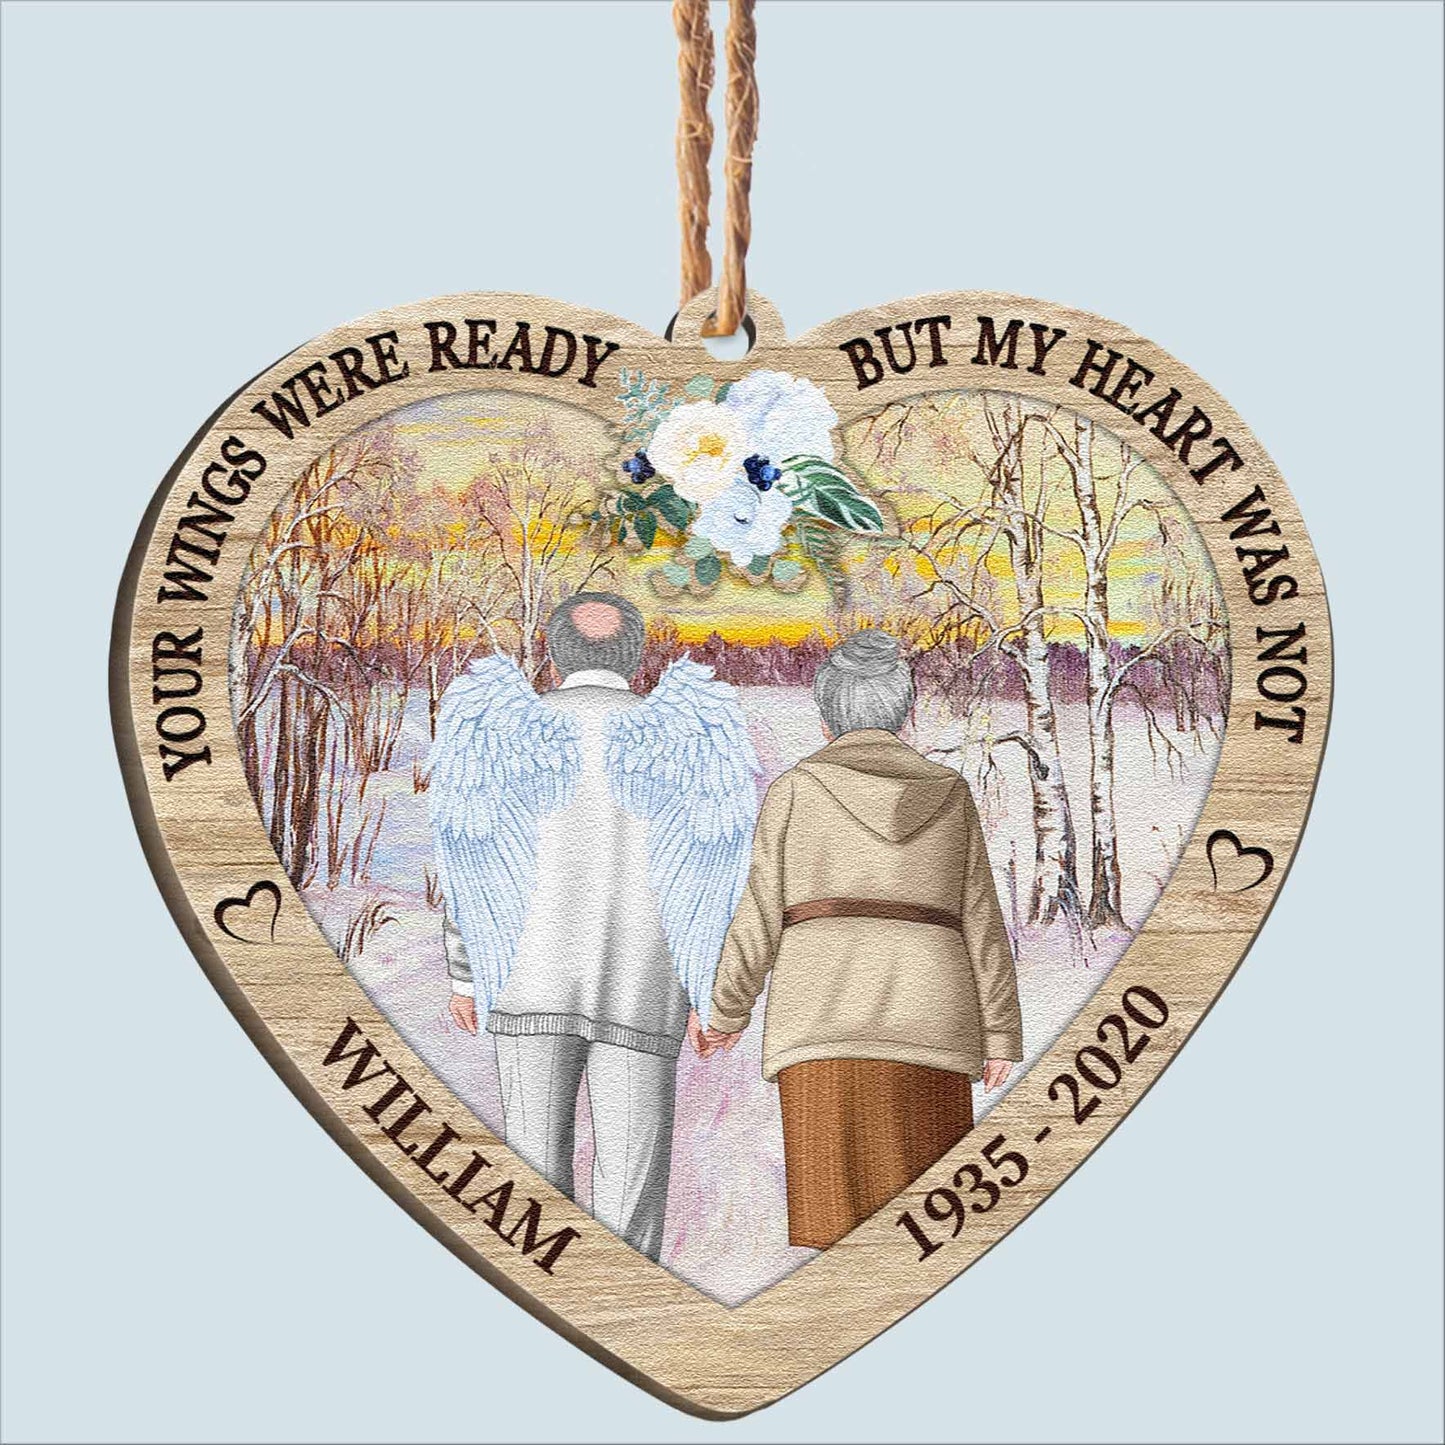 My Heart Was Not Ready - Personalized Custom Shaped Wooden Ornament